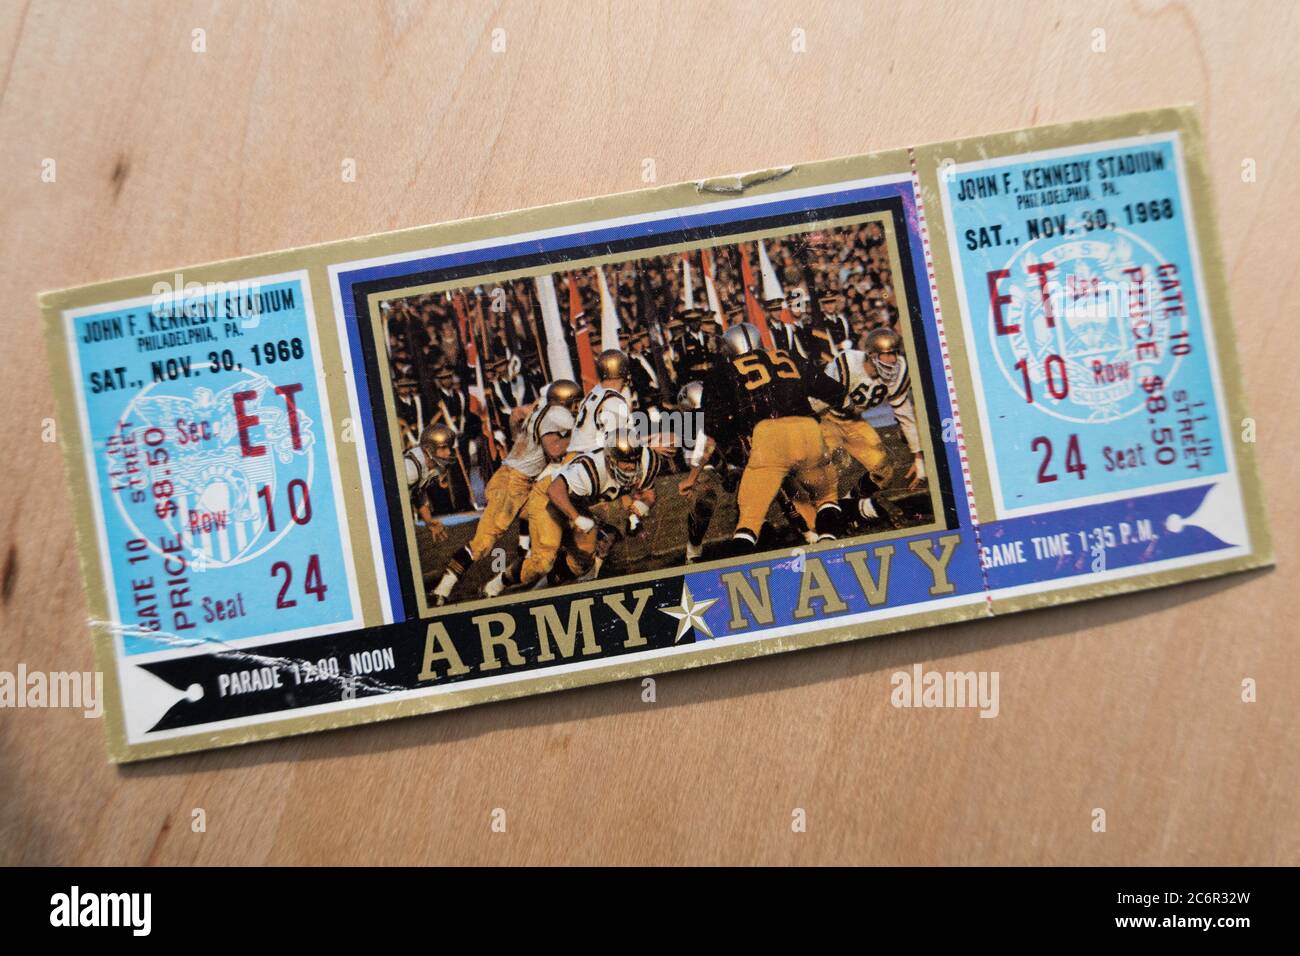 Vintage stadium seat ticket for the Army Navy college football game in Philadelphia, PA, USA Stock Photo